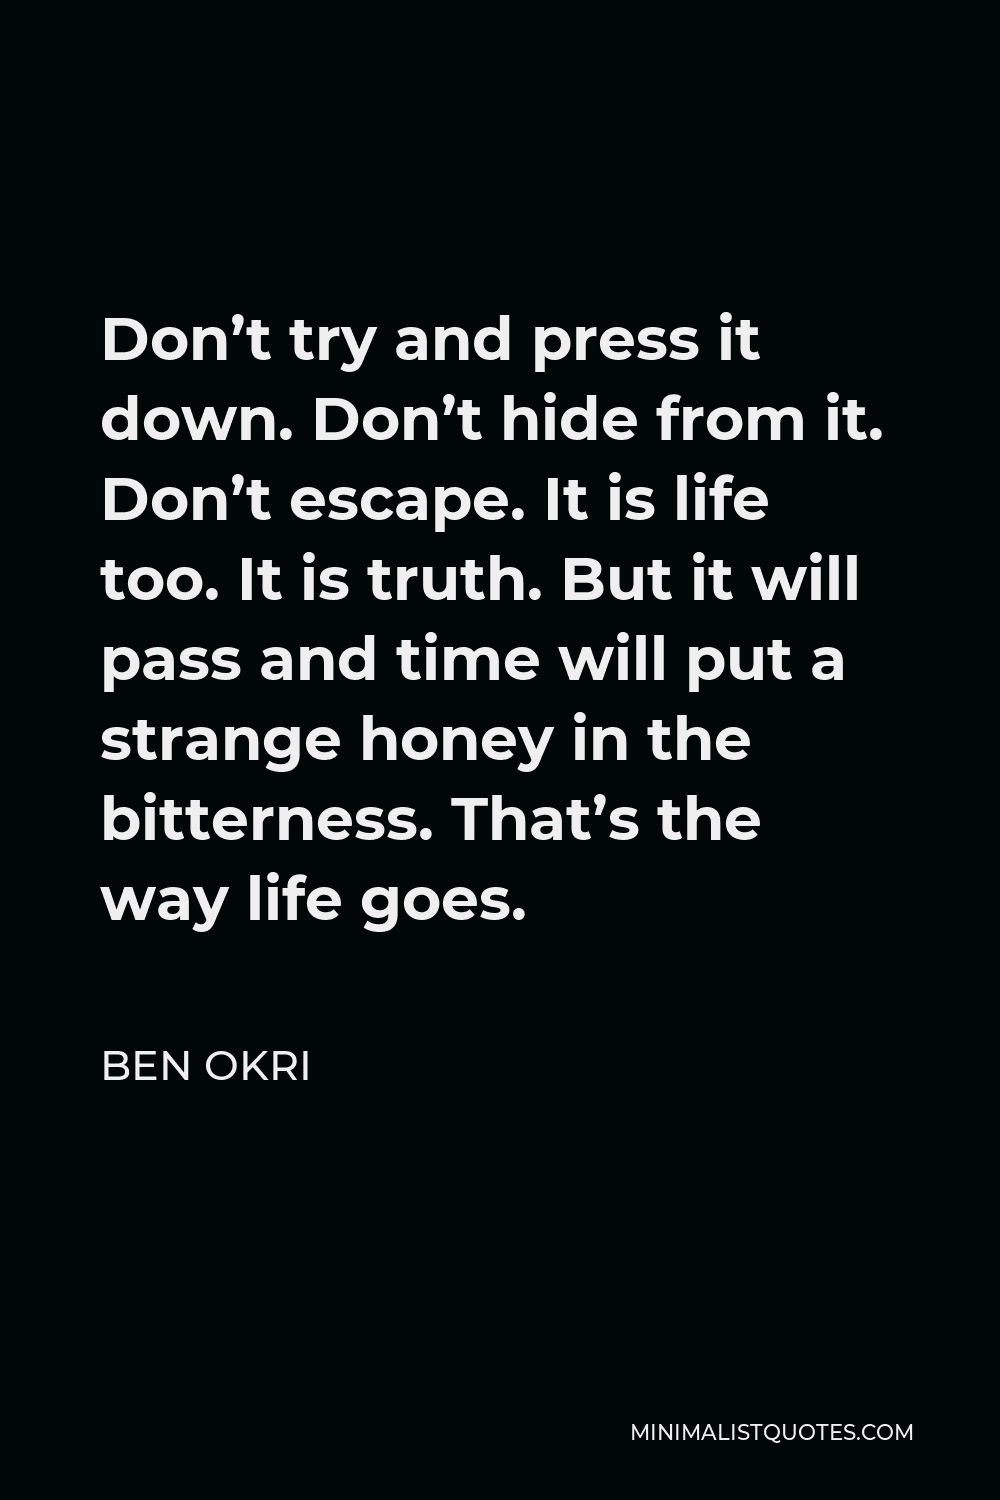 Ben Okri Quote - Don’t try and press it down. Don’t hide from it. Don’t escape. It is life too. It is truth. But it will pass and time will put a strange honey in the bitterness. That’s the way life goes.